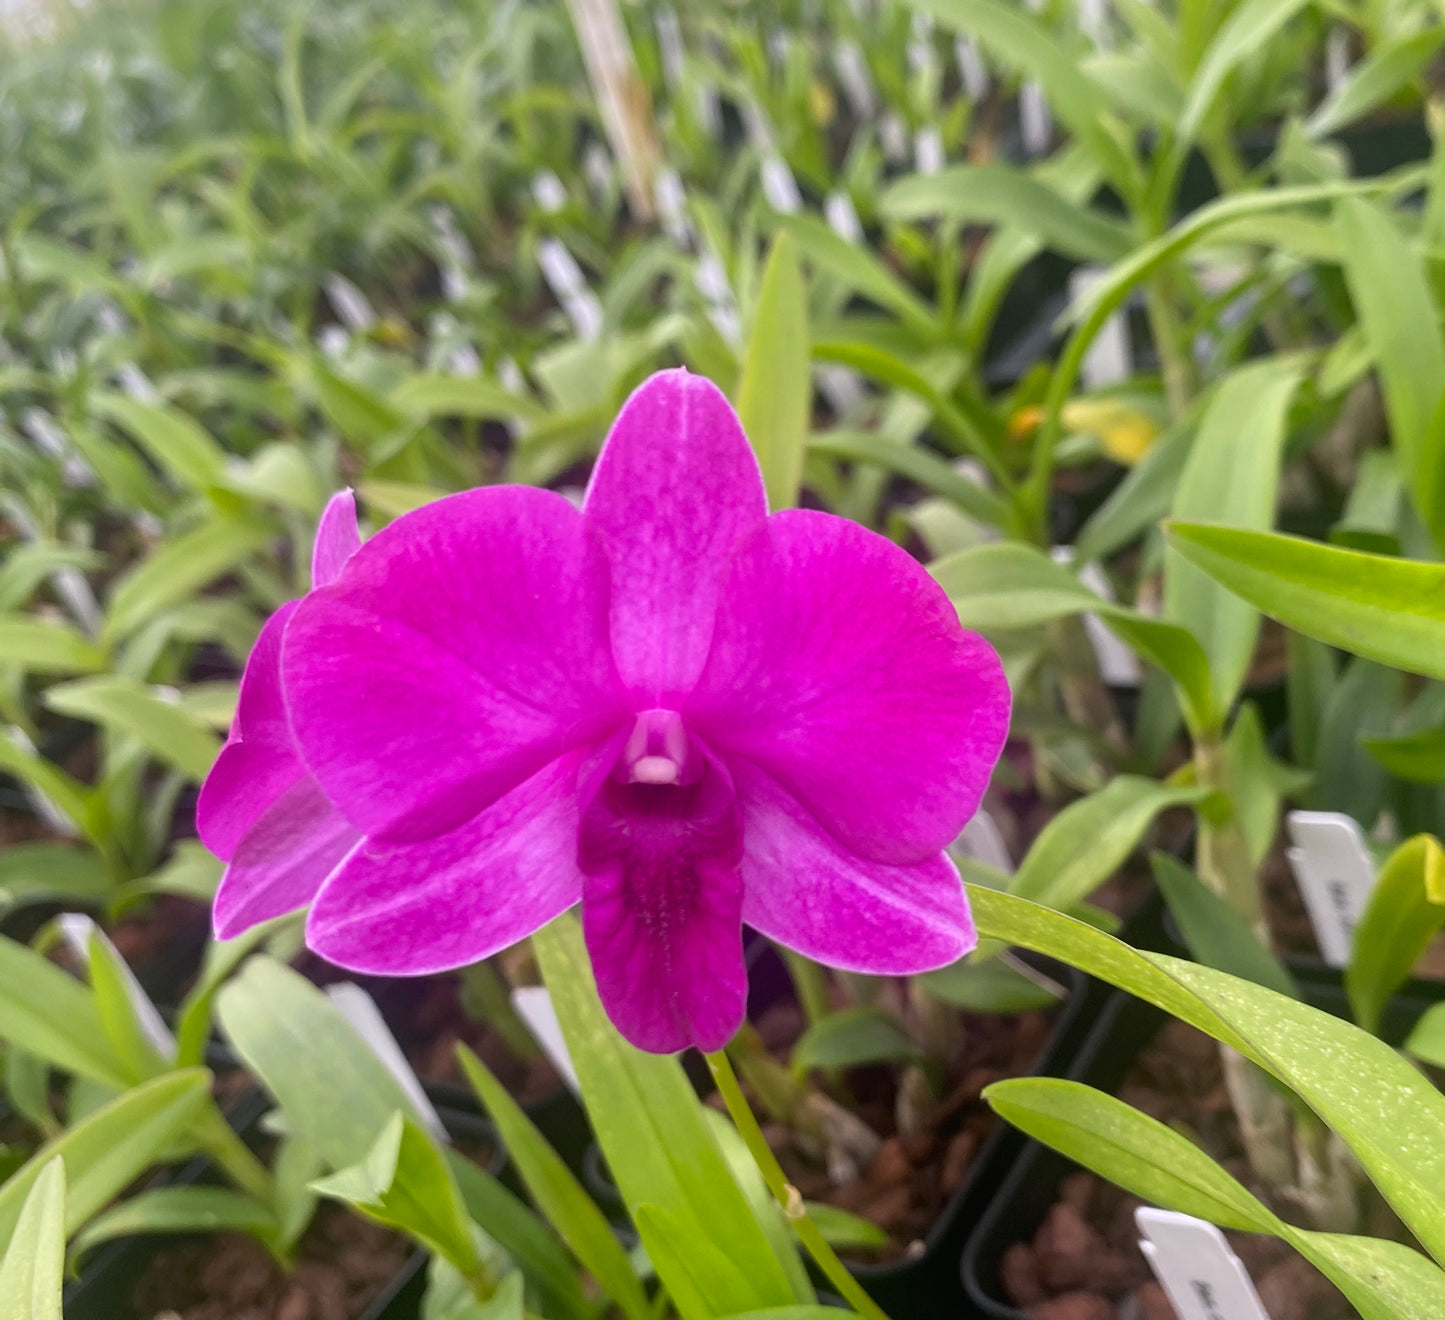 Dendrobium Compactum comes in 4" Pot from Hawaii